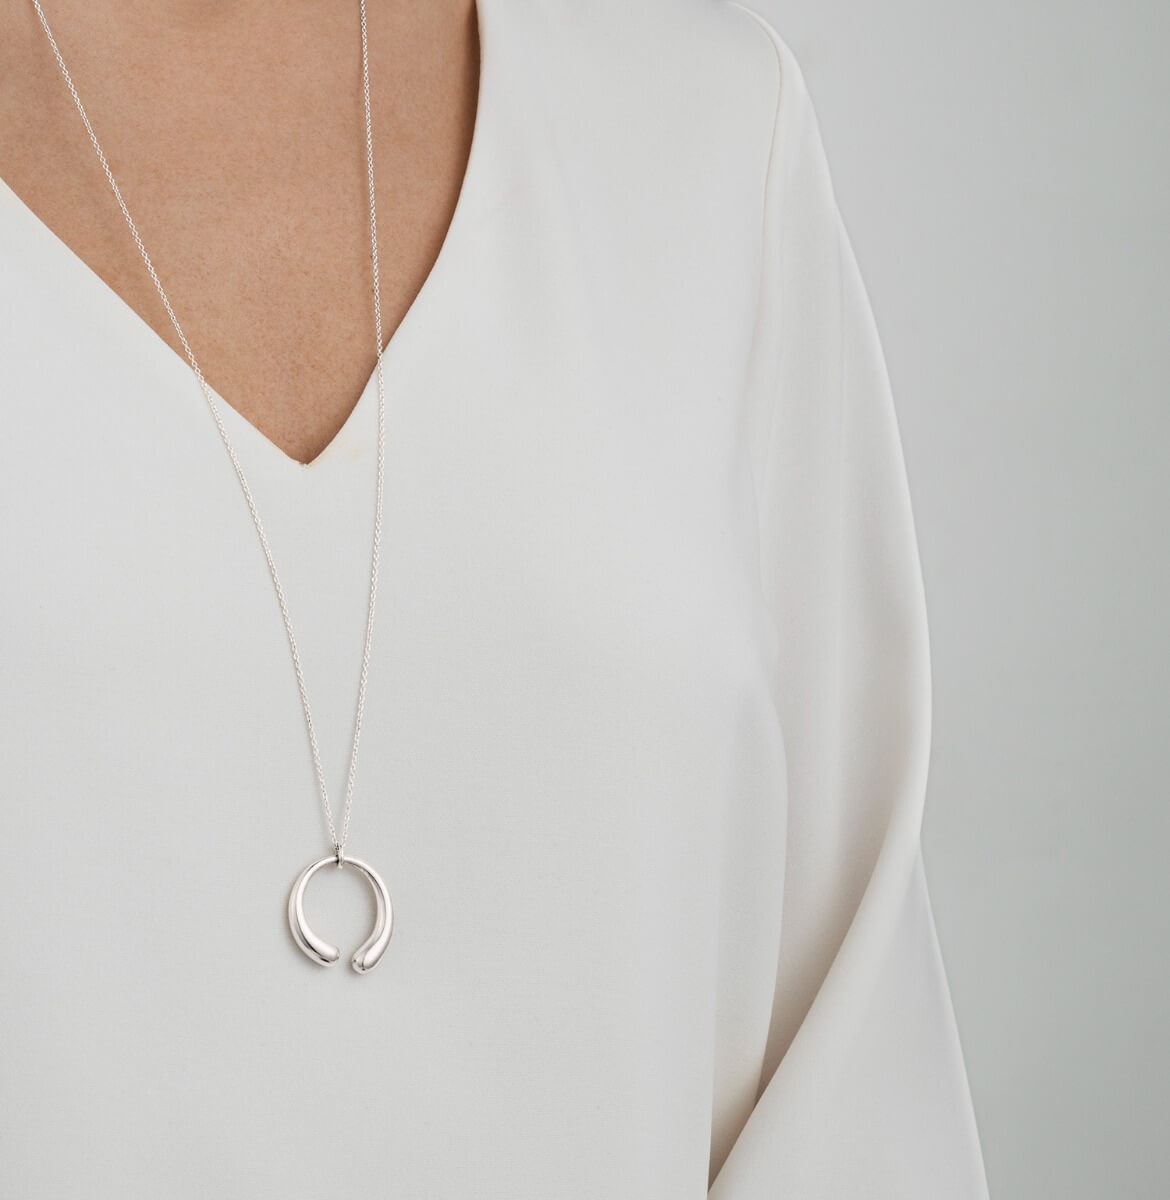 georg jensen silver mercy pendant and chain 10015343